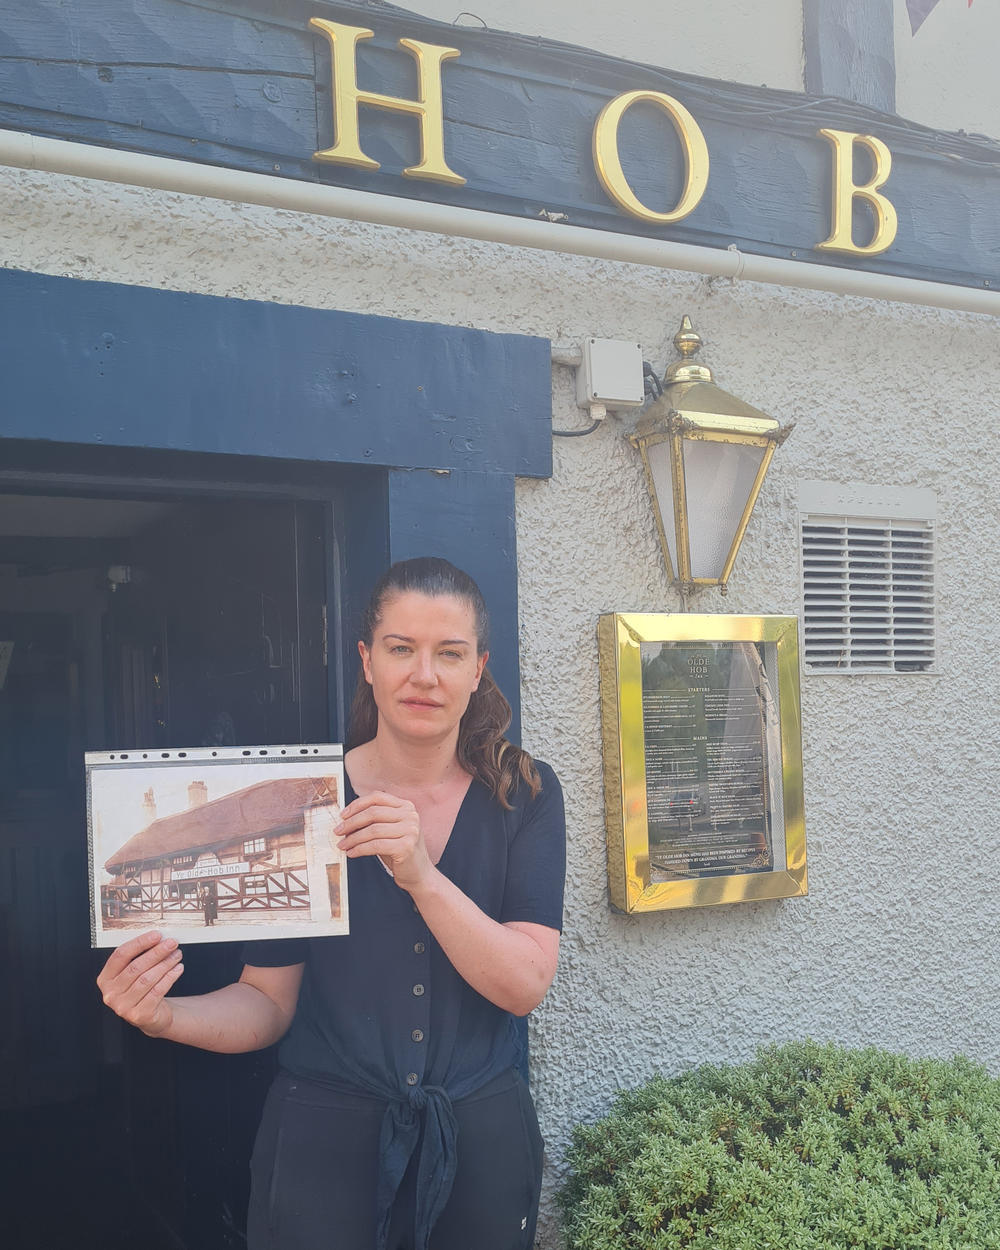 The current landlady at Ye Olde Hob Inn, Sarah Locke, shows NPR an old photo of the pub during the 1940s, when it was a favorite watering hole of Black U.S. soldiers stationed nearby during World War II.